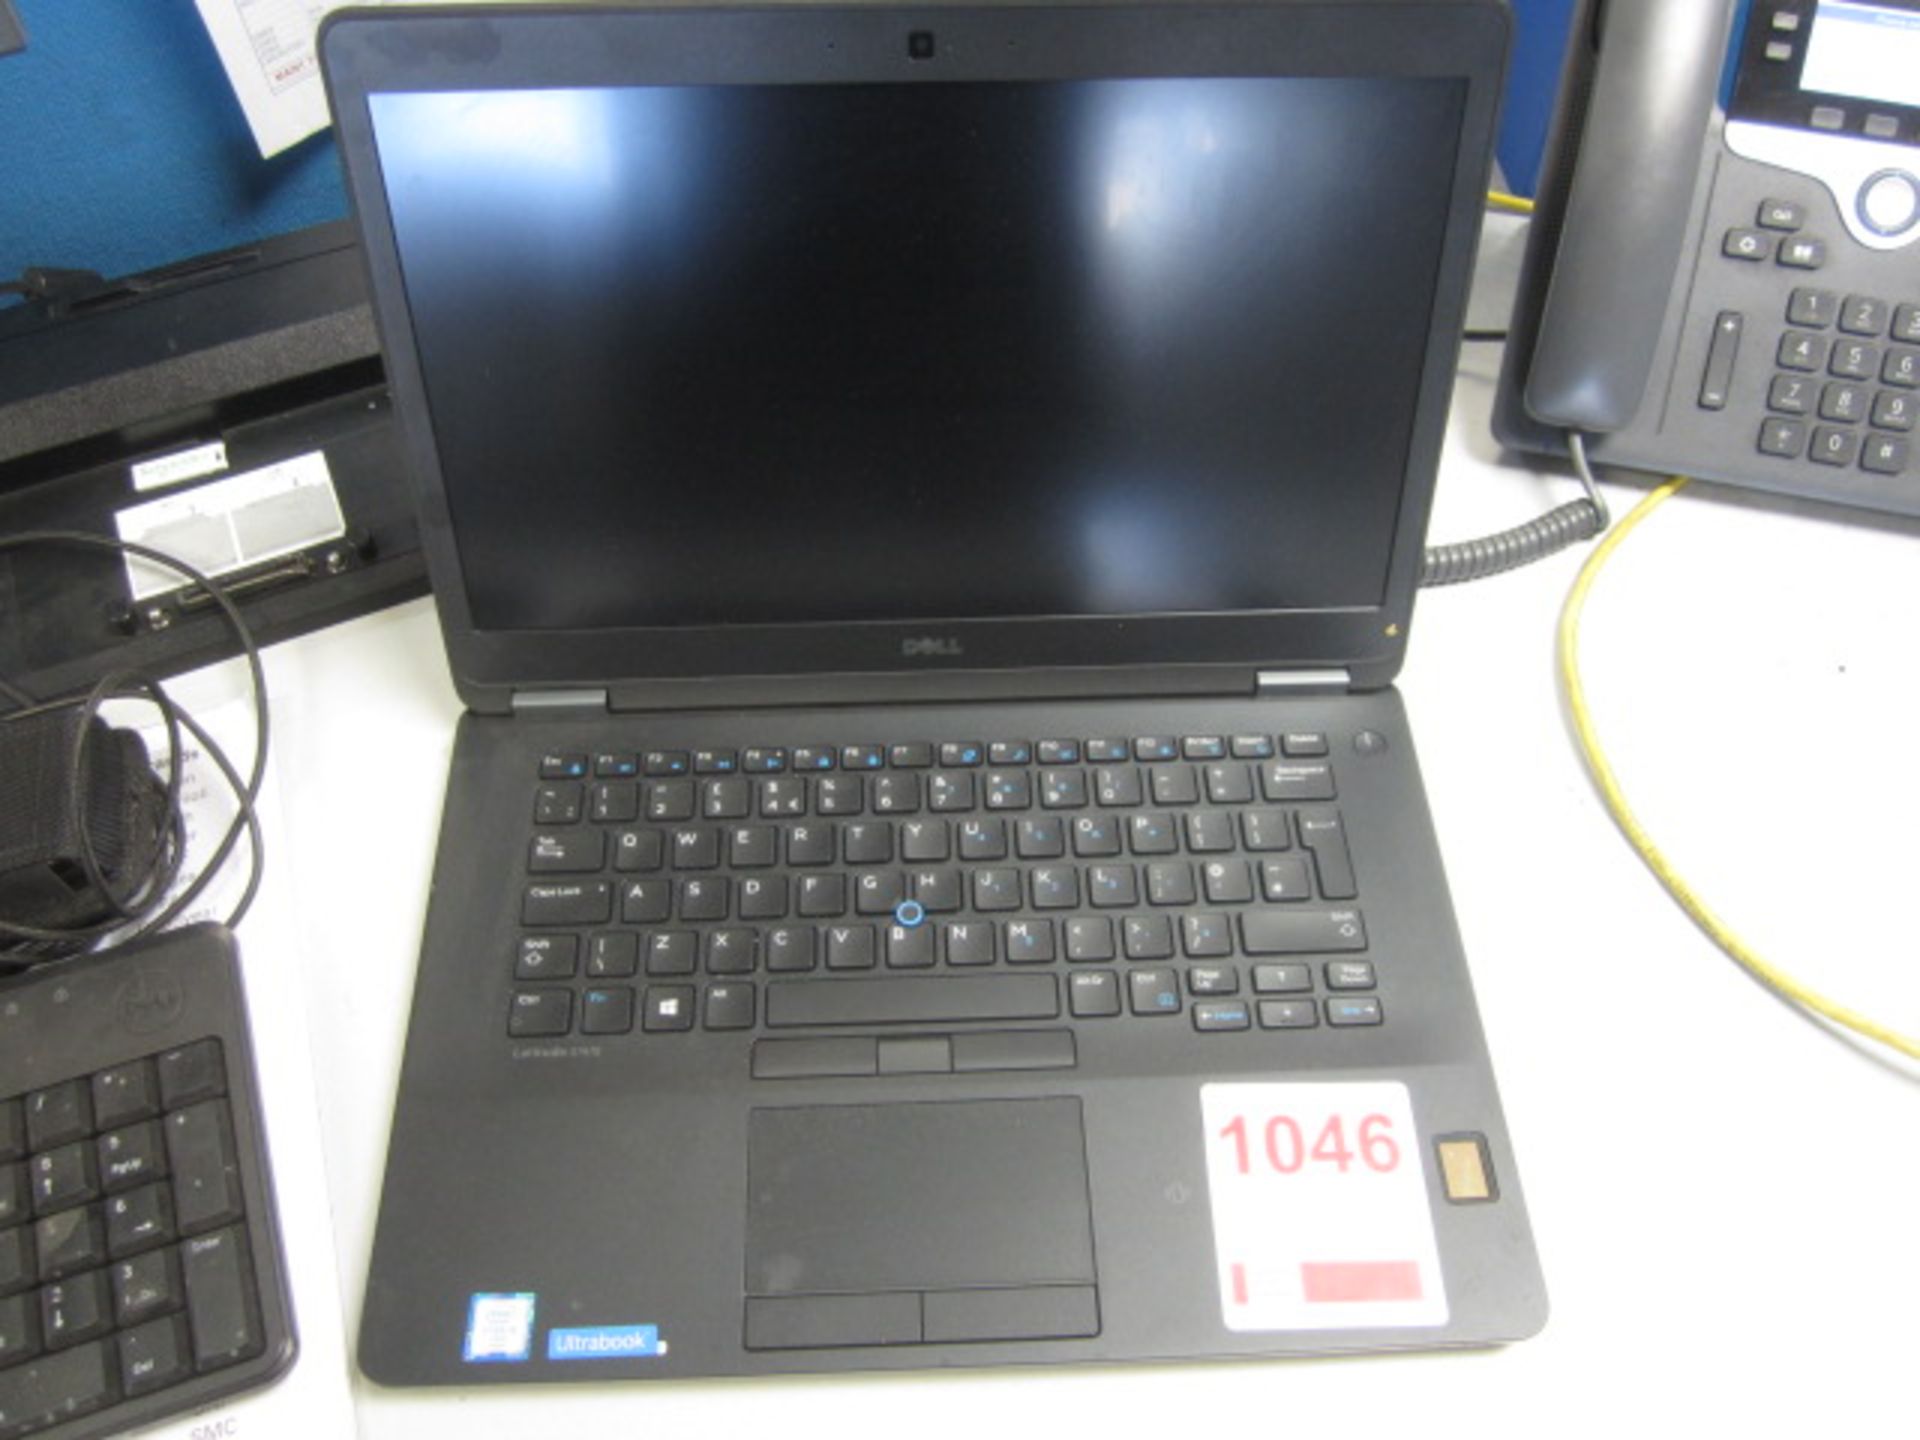 Dell Latitude E7450 Core i5 laptop, Dell docking station, flat screen monitor, keyboard, mouse - Image 2 of 3